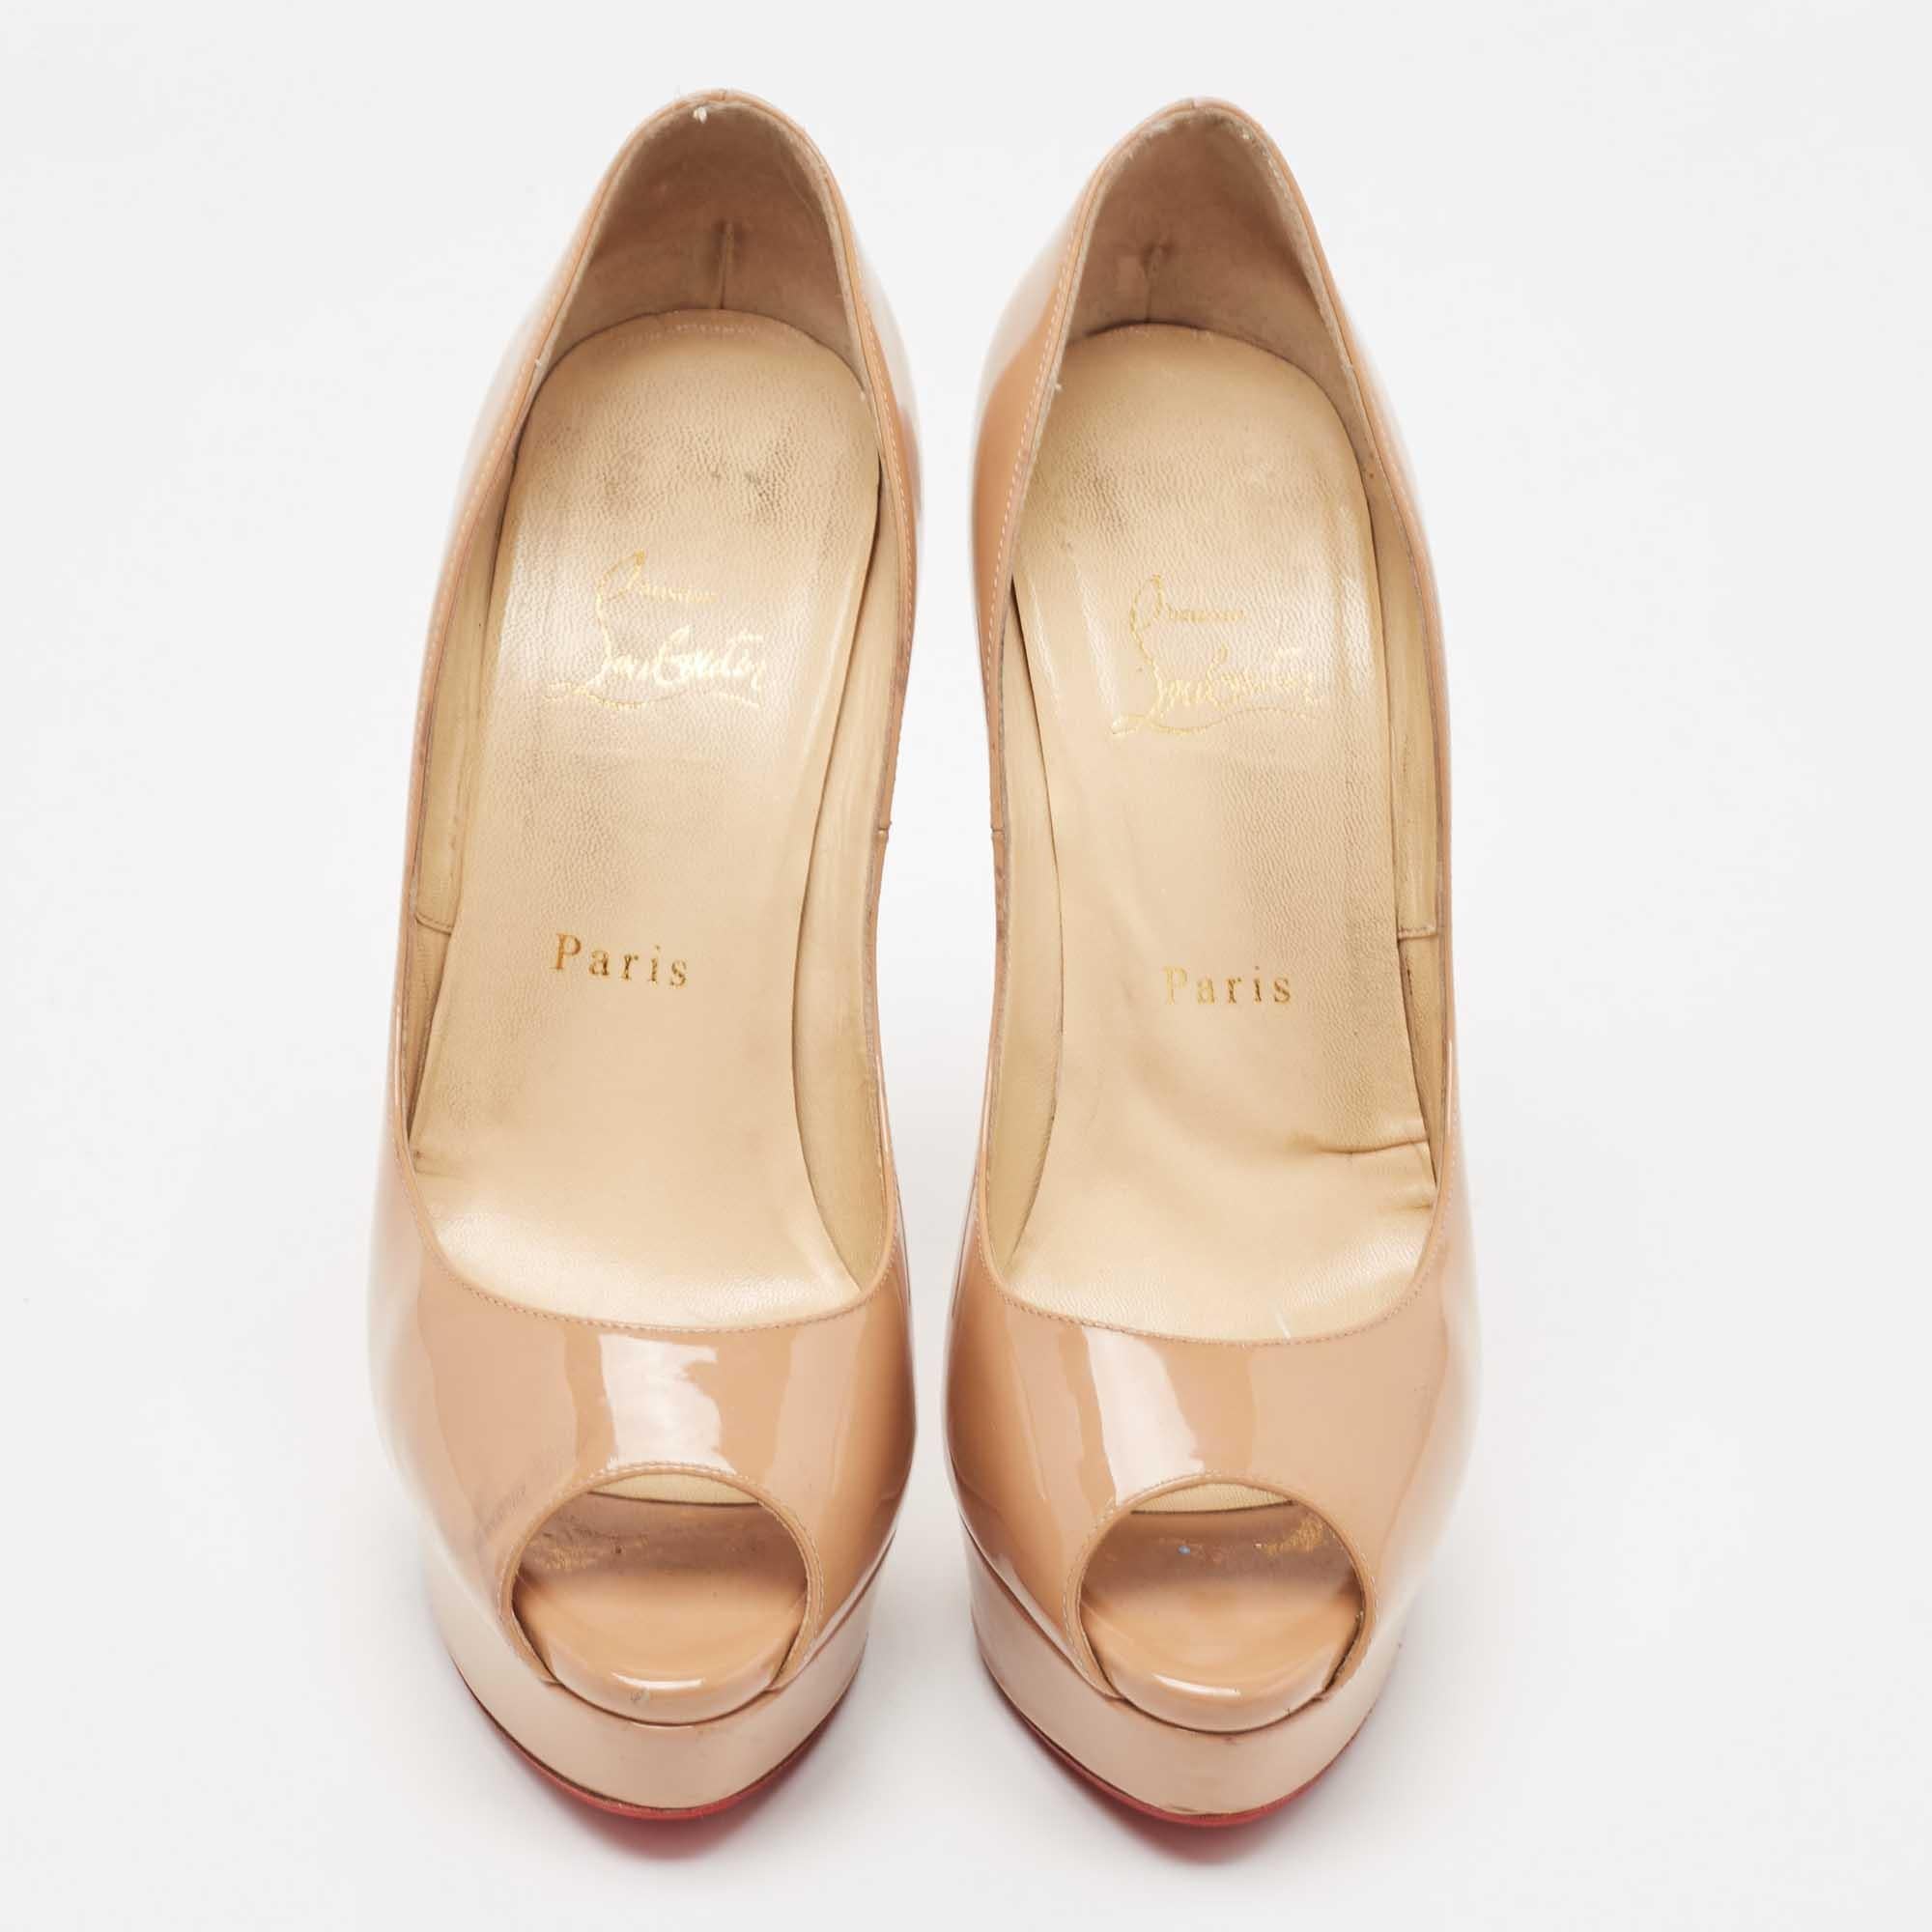 Stand out from the crowd with this pair of Christian Louboutin pumps that exude high fashion with class. Crafted from patent leather, this is a creation from their Lady Peep collection. It features a beige shade shade and a glossy exterior.